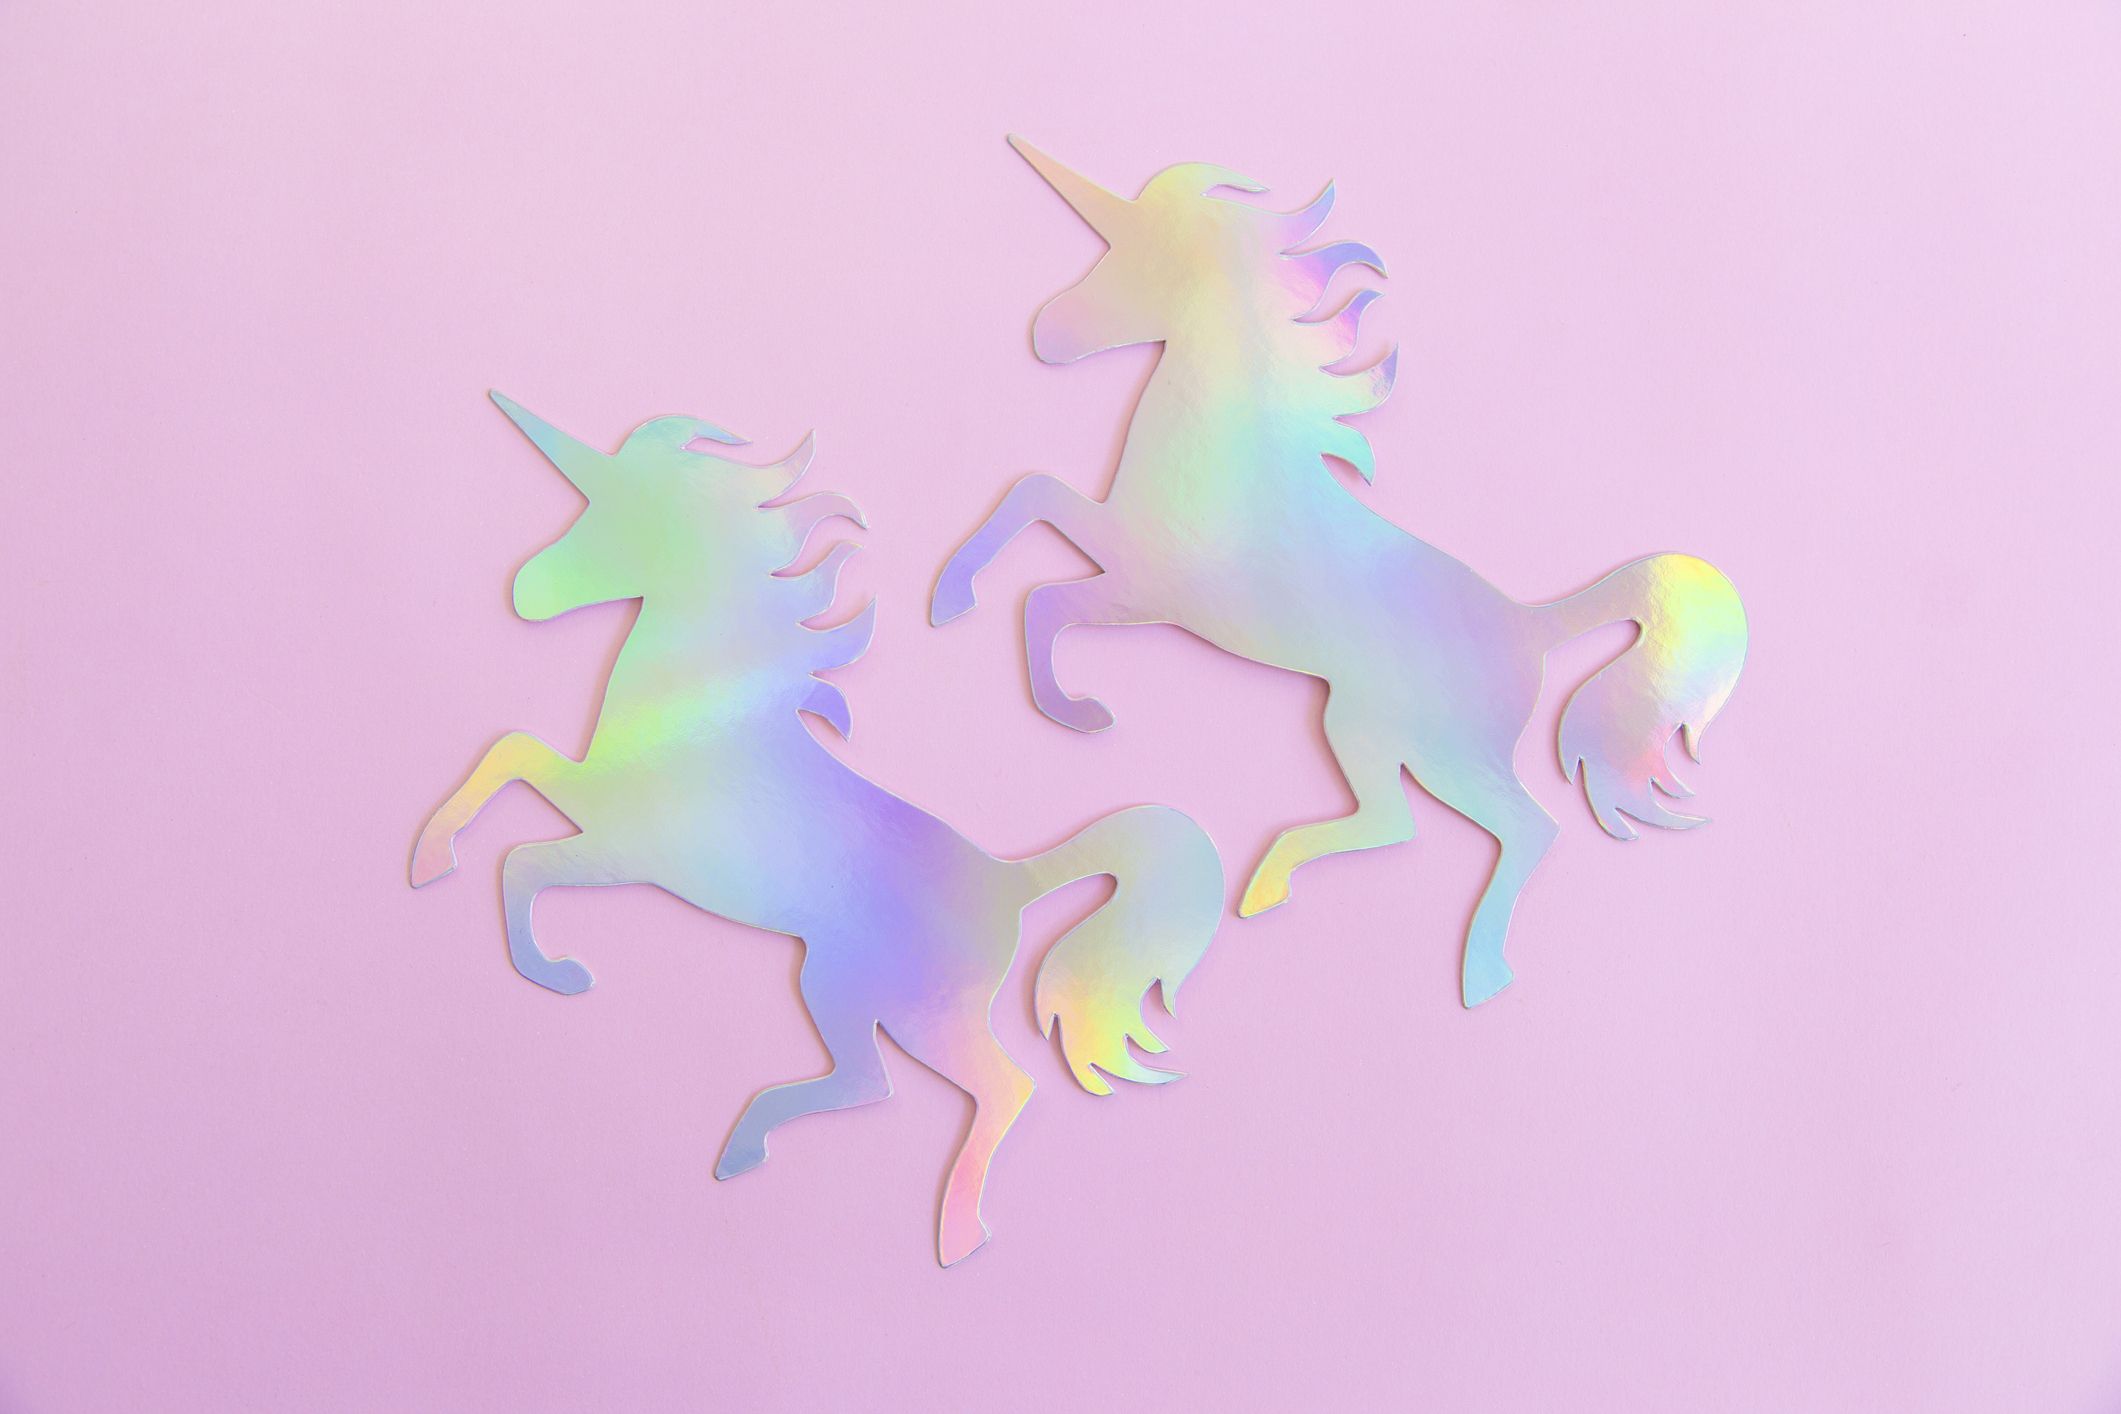 What Ordinary Objects Can You Make Pretty With Unicorn Spit